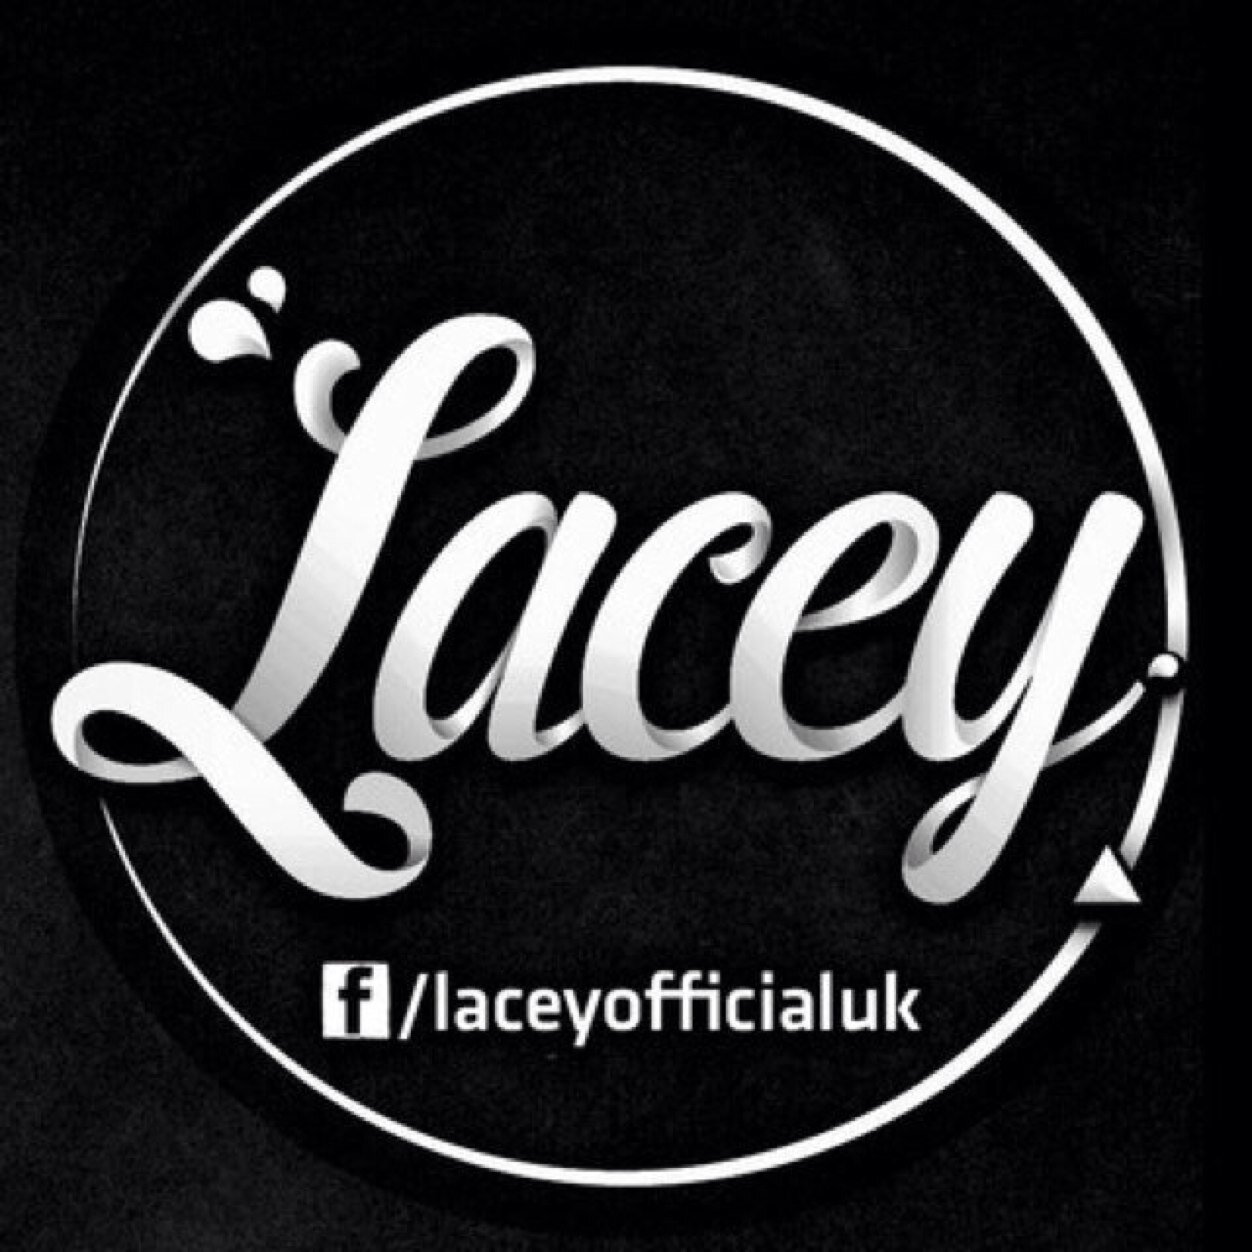 Hey it's Joanne here, I suck at this thing. Follow @LaceyOfficialUk and @LaceysOutlaws pls.